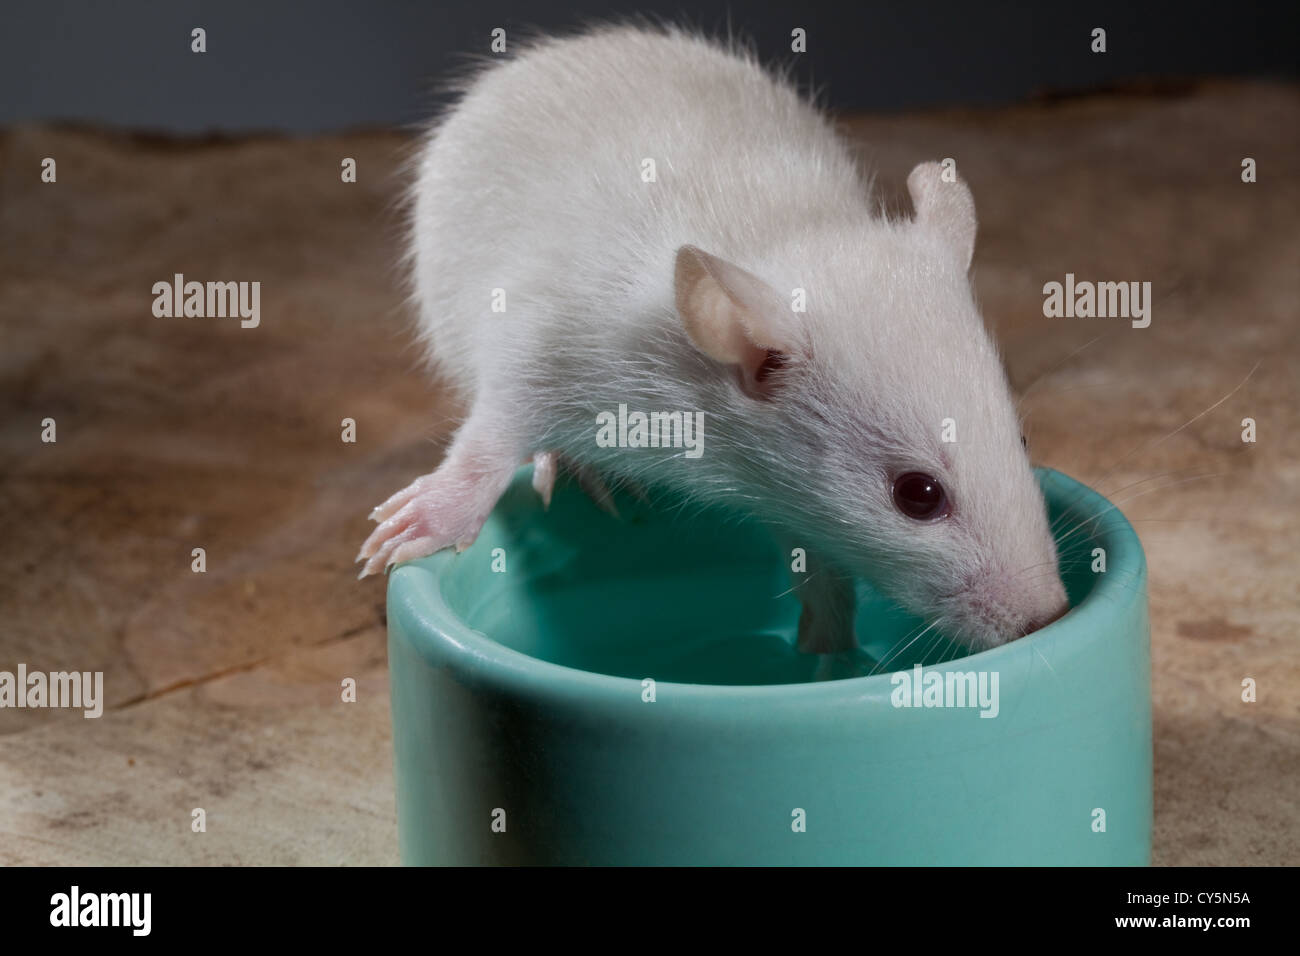 Young Albino White Rat Rattus norvegicus. Drinking from a water bowl. Stock Photo